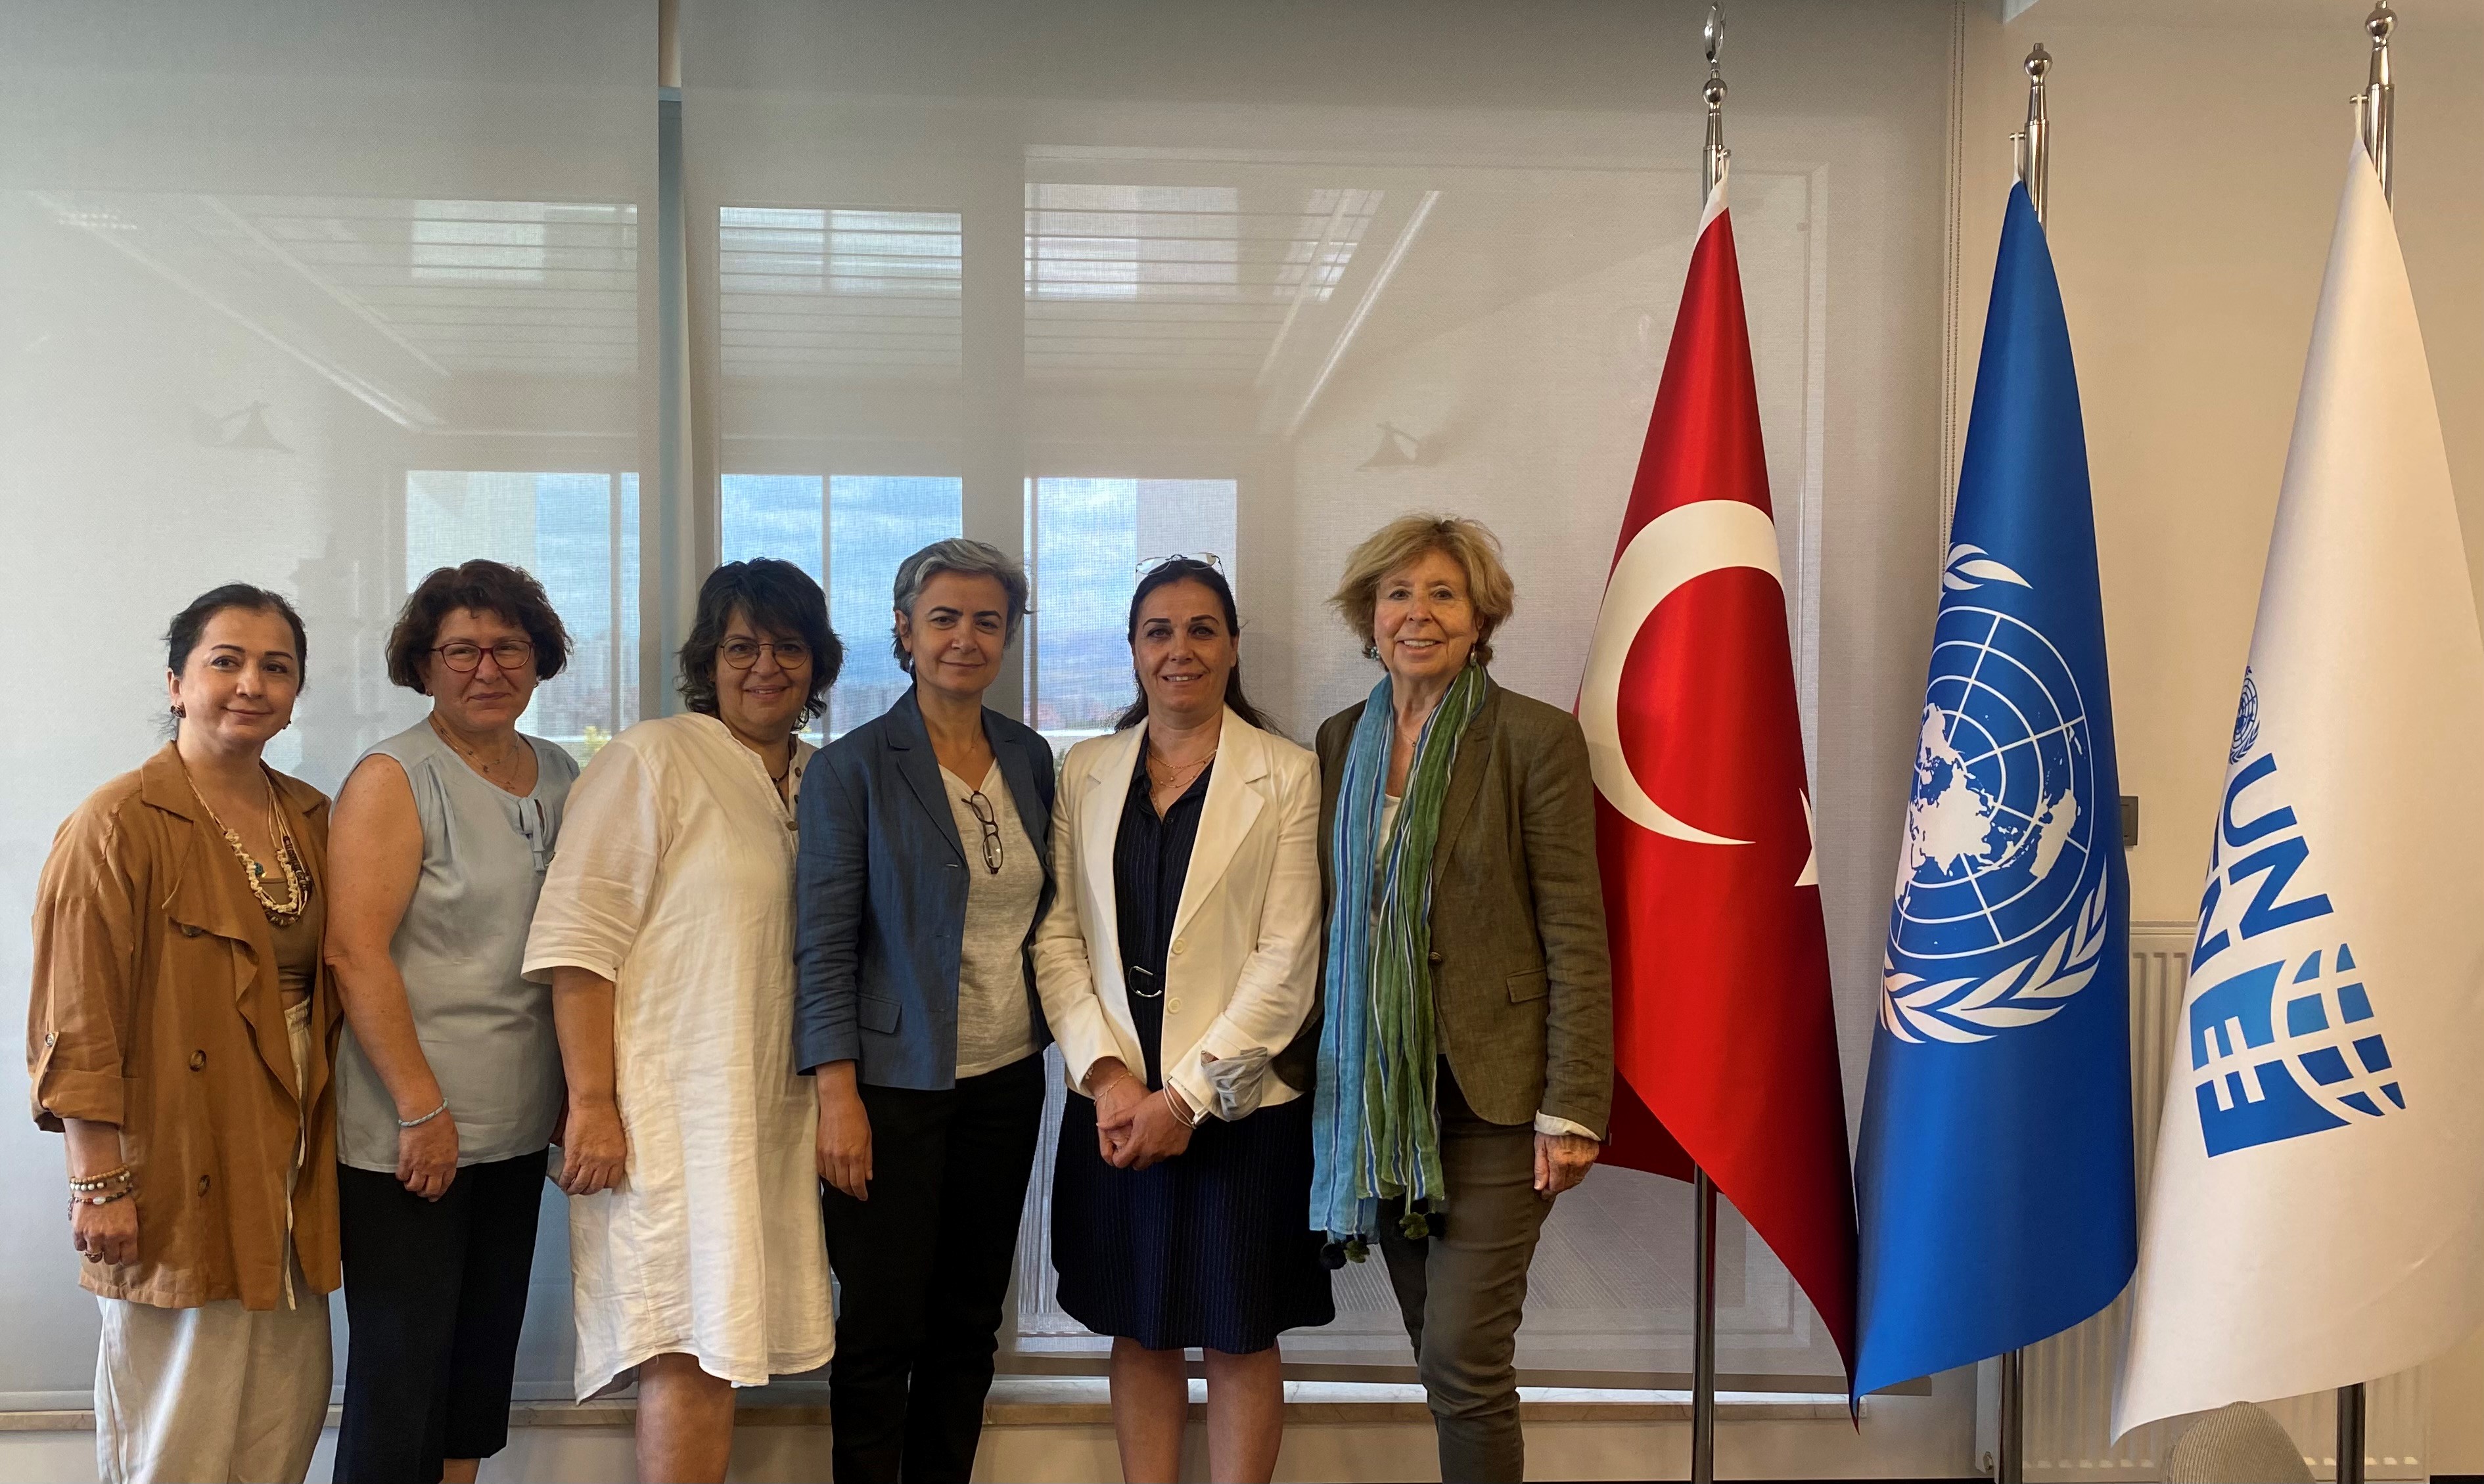 Members of Türkiye’s Civil Society Executive Committee for NGO Forum on CEDAW participated in the 82nd Session of the Committee on the Elimination of Discrimination against Women (CEDAW), held in Geneva in June 2022. Photo: Sena Şar/UN Women Türkiye.